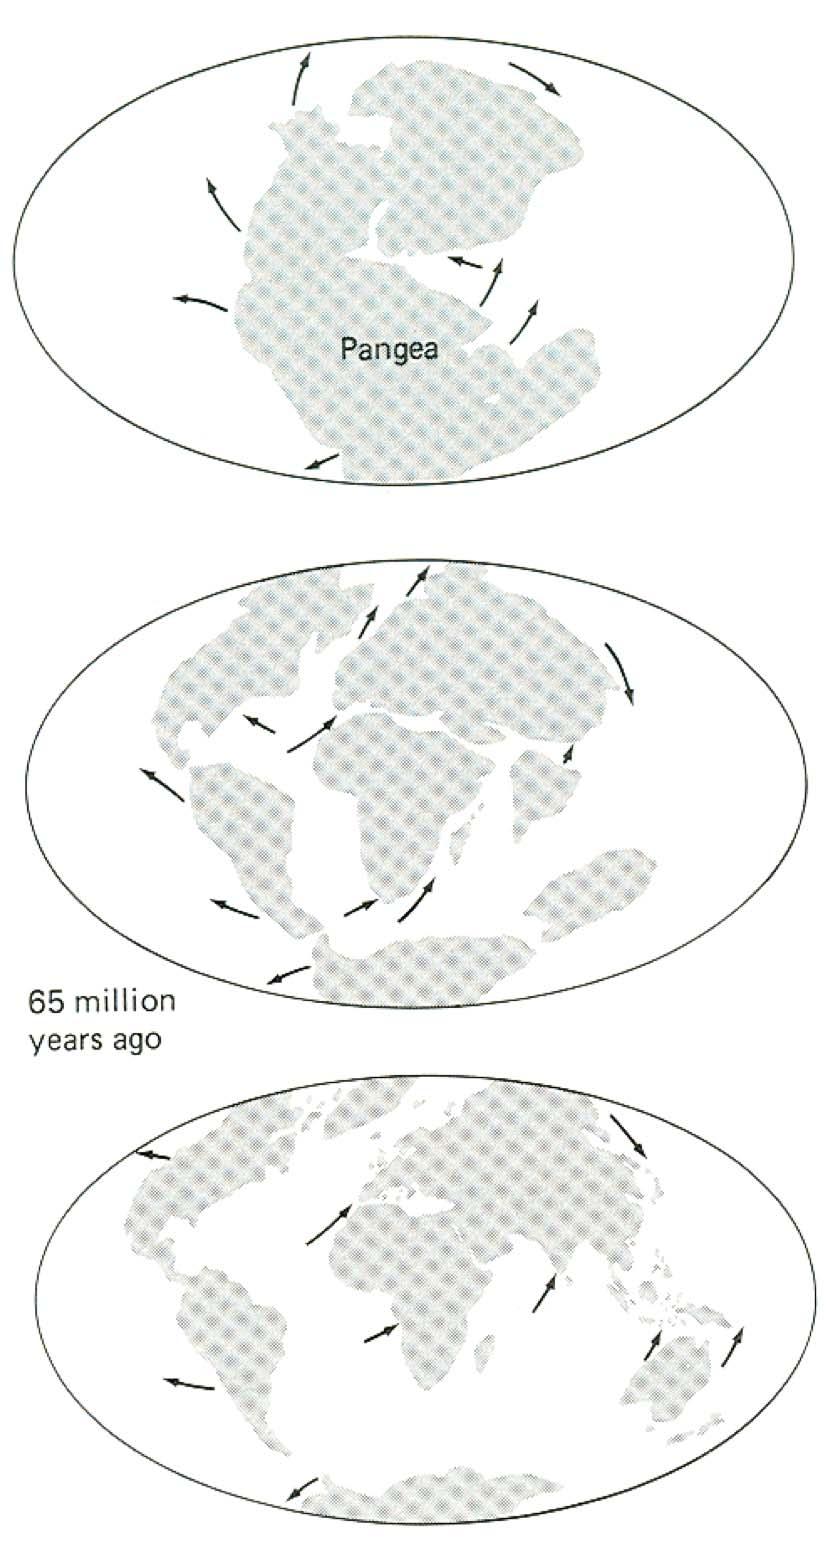 4 Historical Continental Configurations (top) Pangaea about 200 million years before present (MYBP);